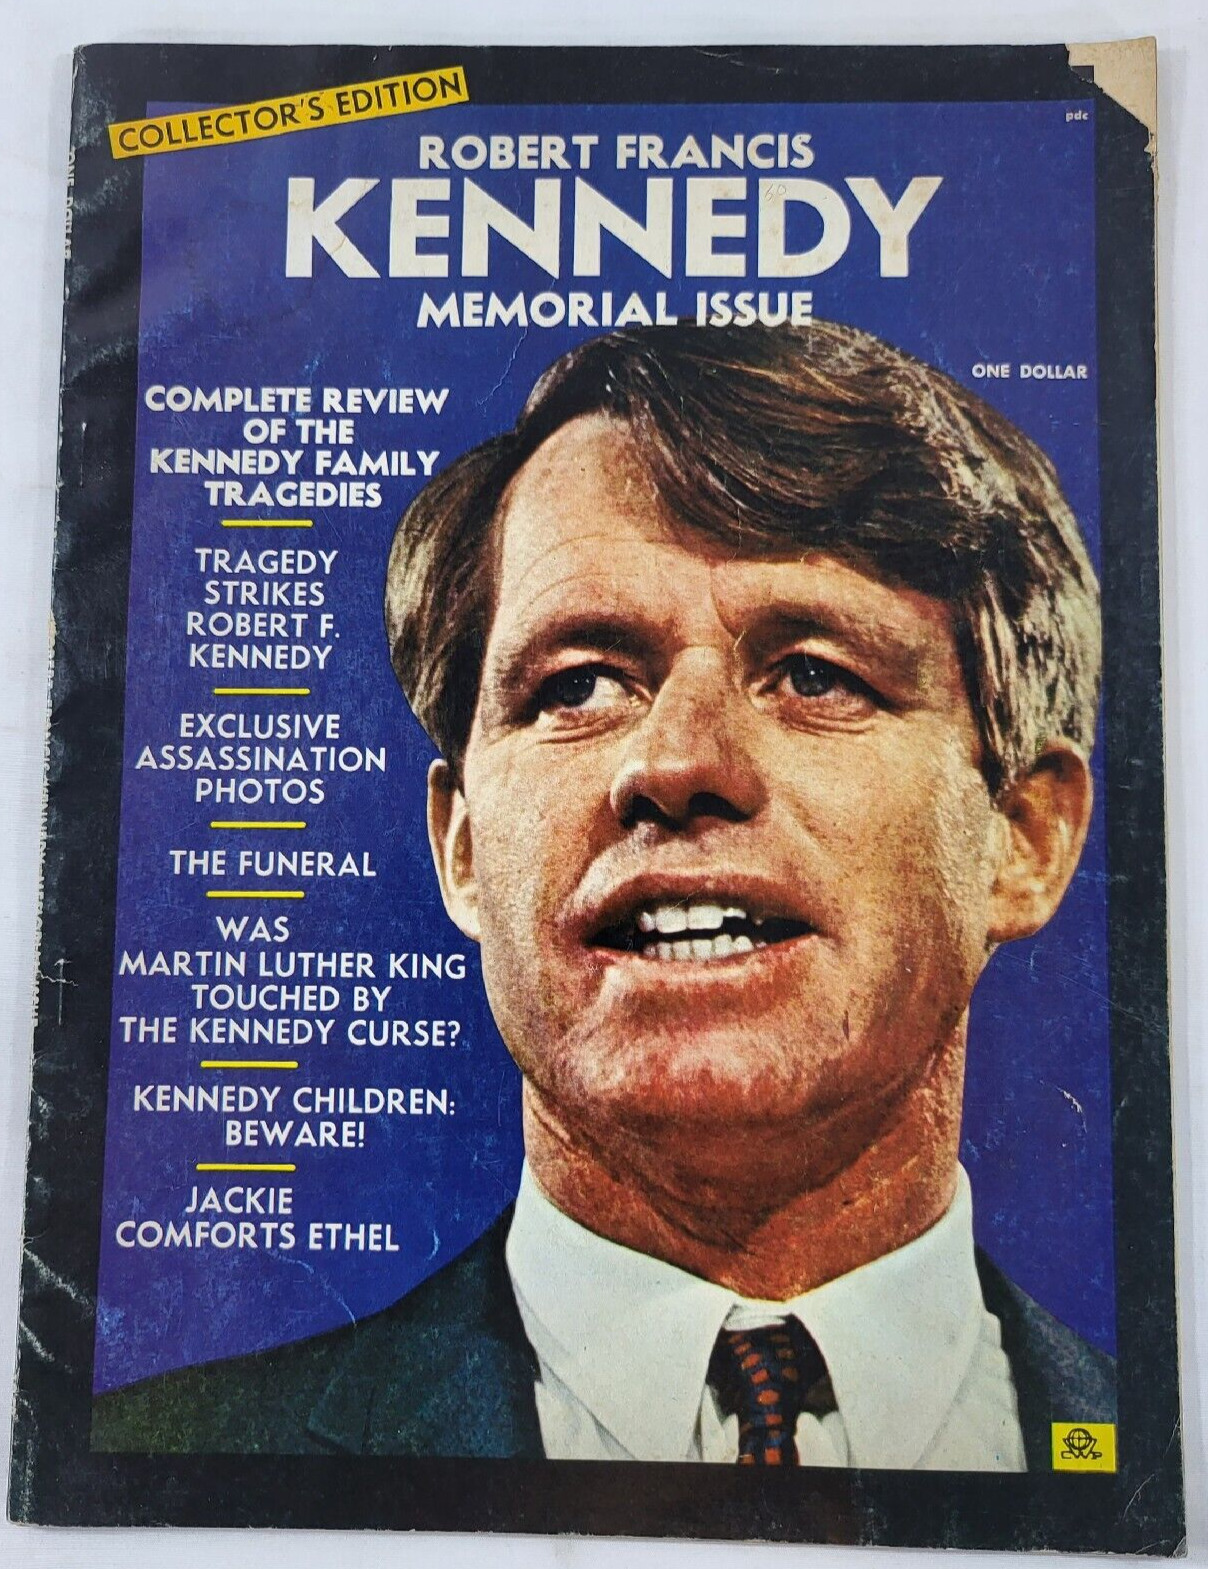 1968 Robert Francis Kennedy Memorial Issue